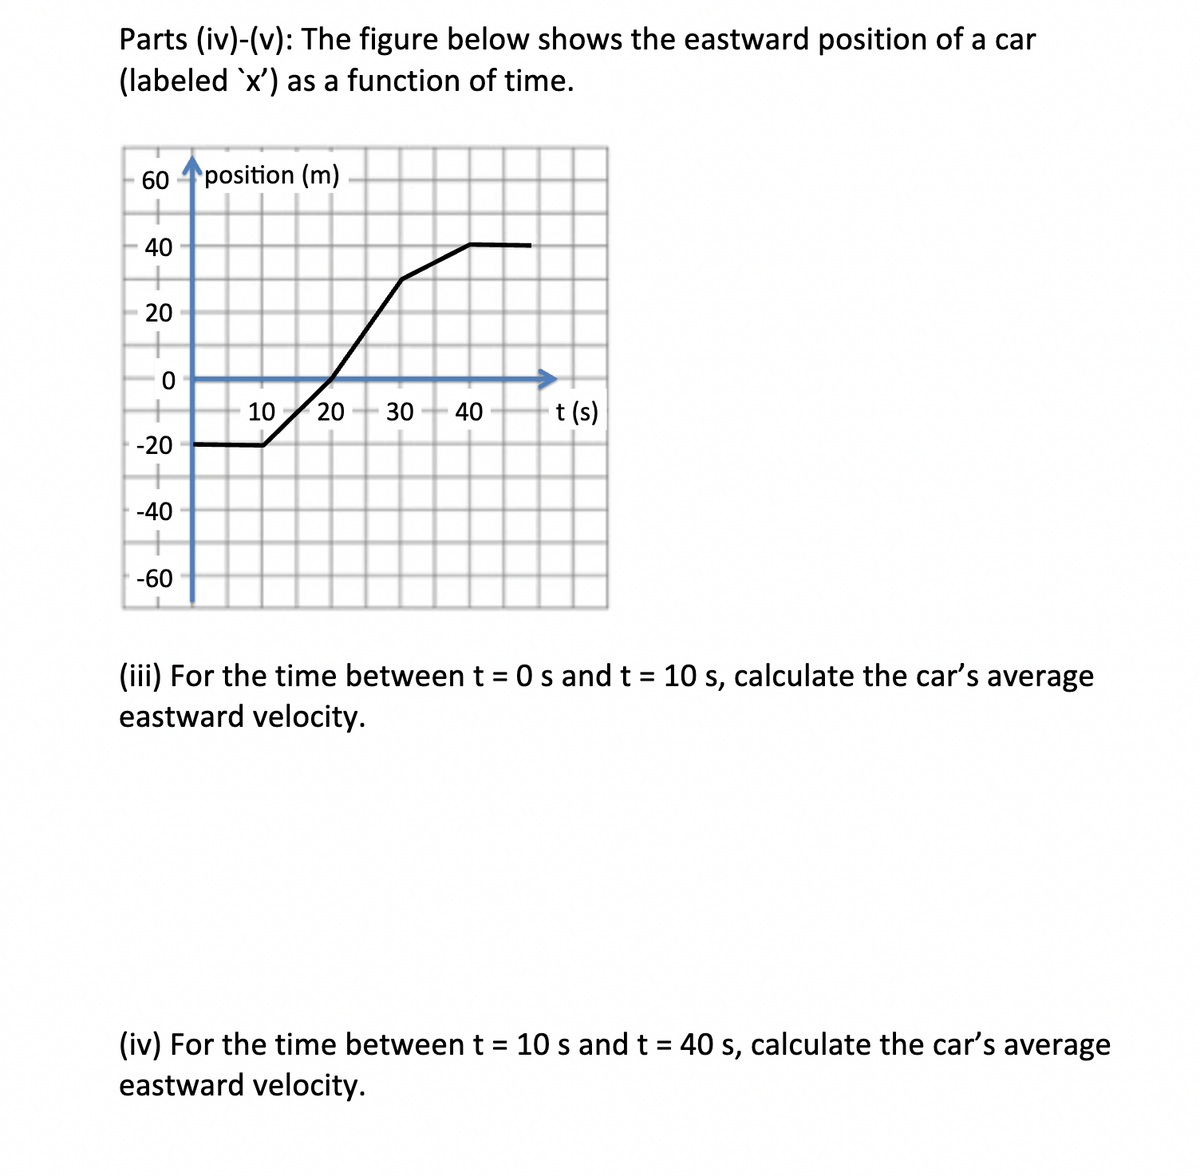 Parts (iv)-(v): The figure below shows the eastward position of a car
(labeled 'x') as a function of time.
60
40
+
20
O
-20
-40
-60
position (m)
10 20 30 40
t(s)
(iii) For the time between t = 0s and t = 10 s, calculate the car's average
eastward velocity.
(iv) For the time between t = 10 s and t = 40 s, calculate the car's average
eastward velocity.